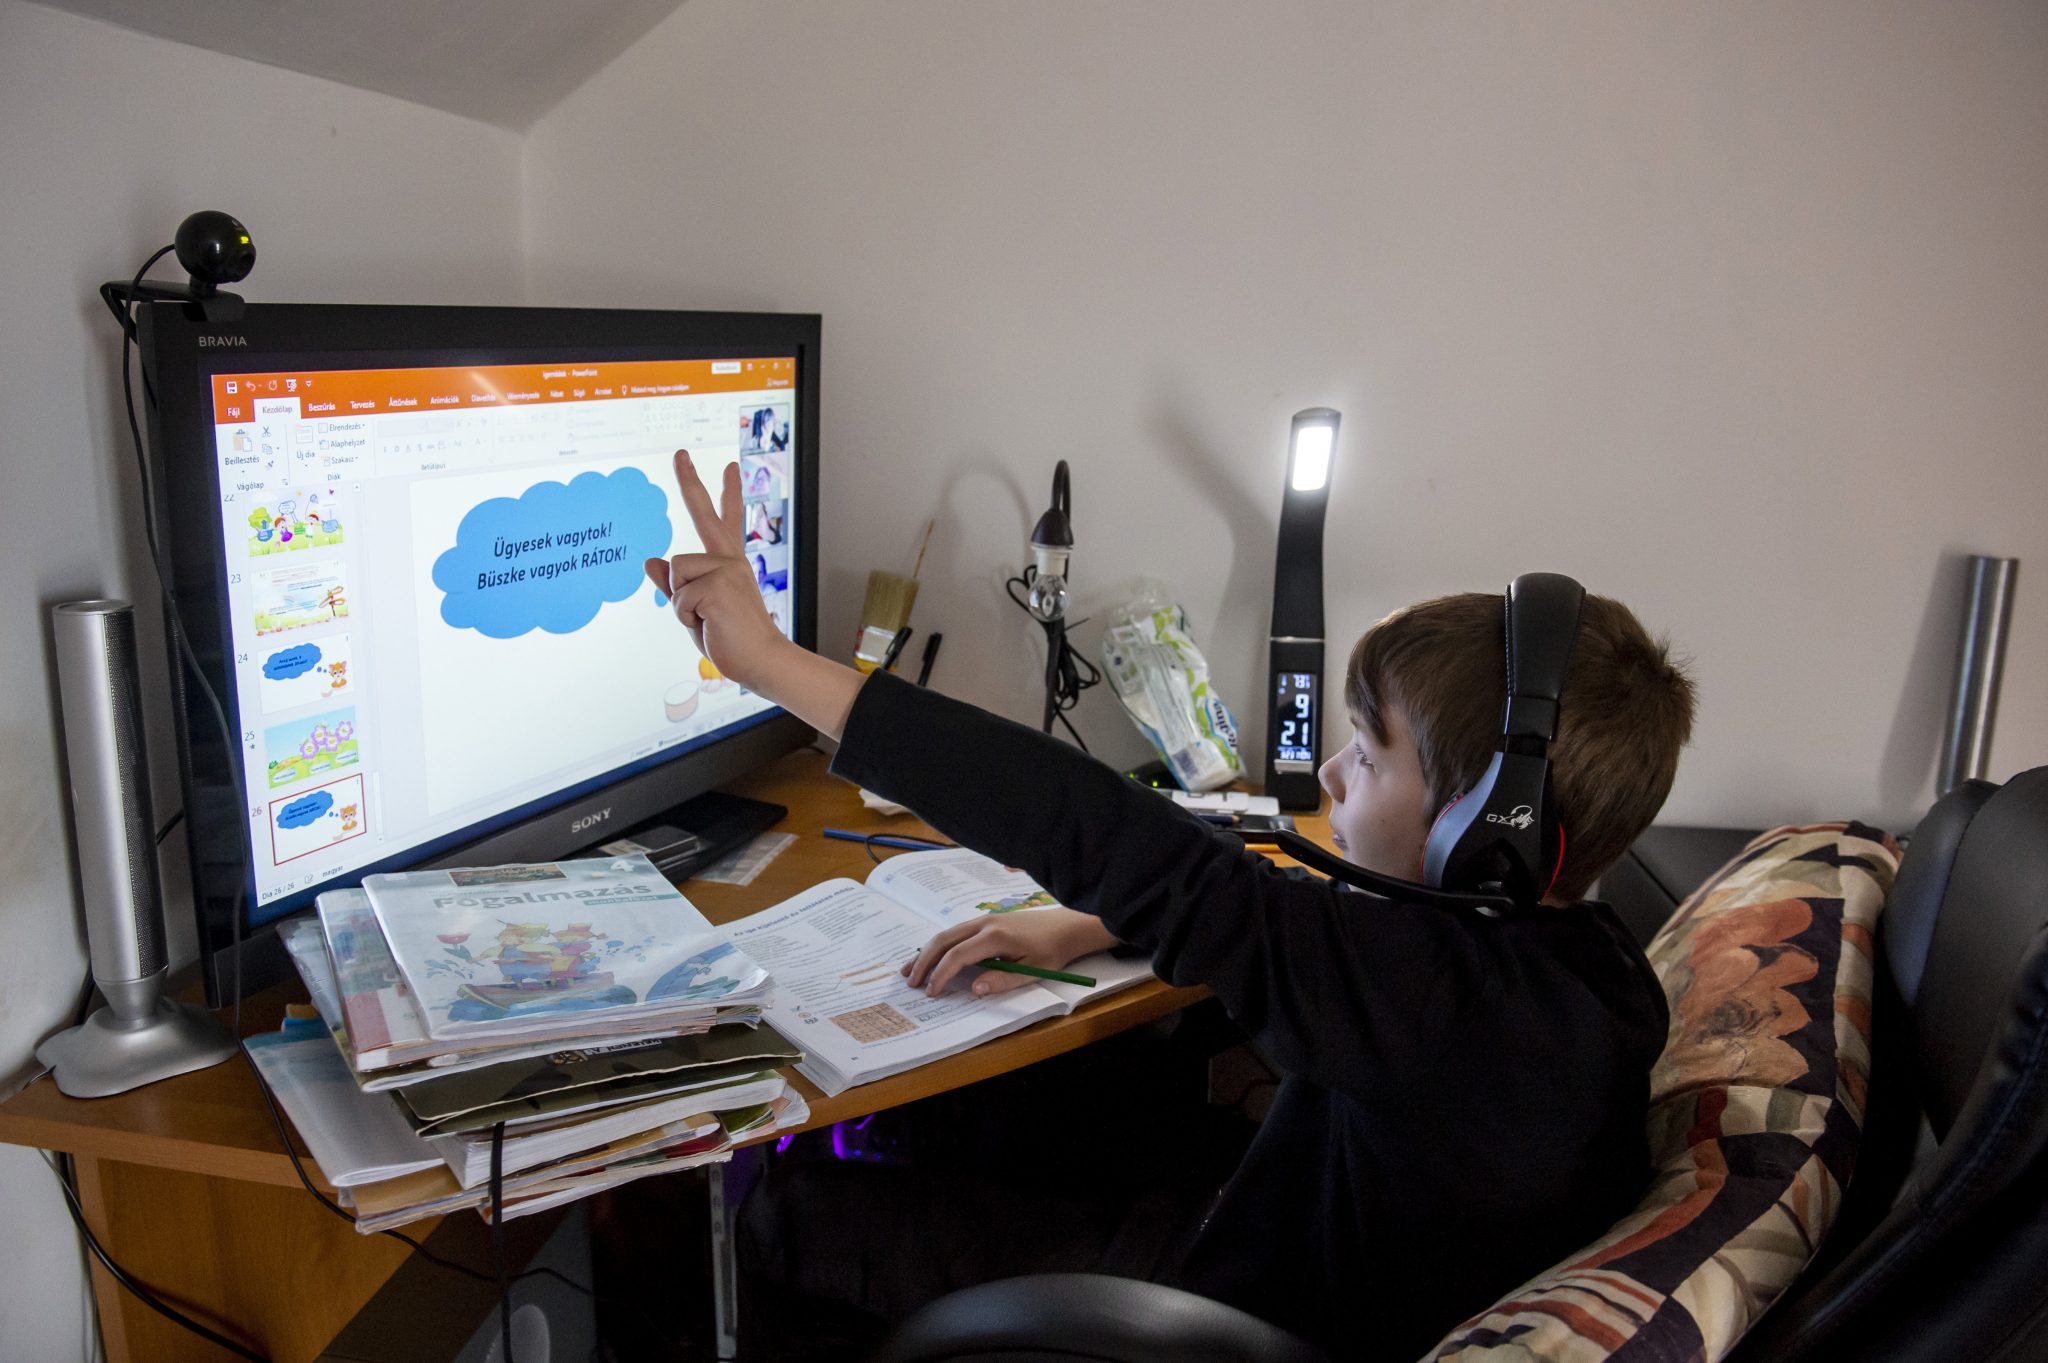 Distance Learning Concludes with Extra Efforts by Families and Gained Digital Experience